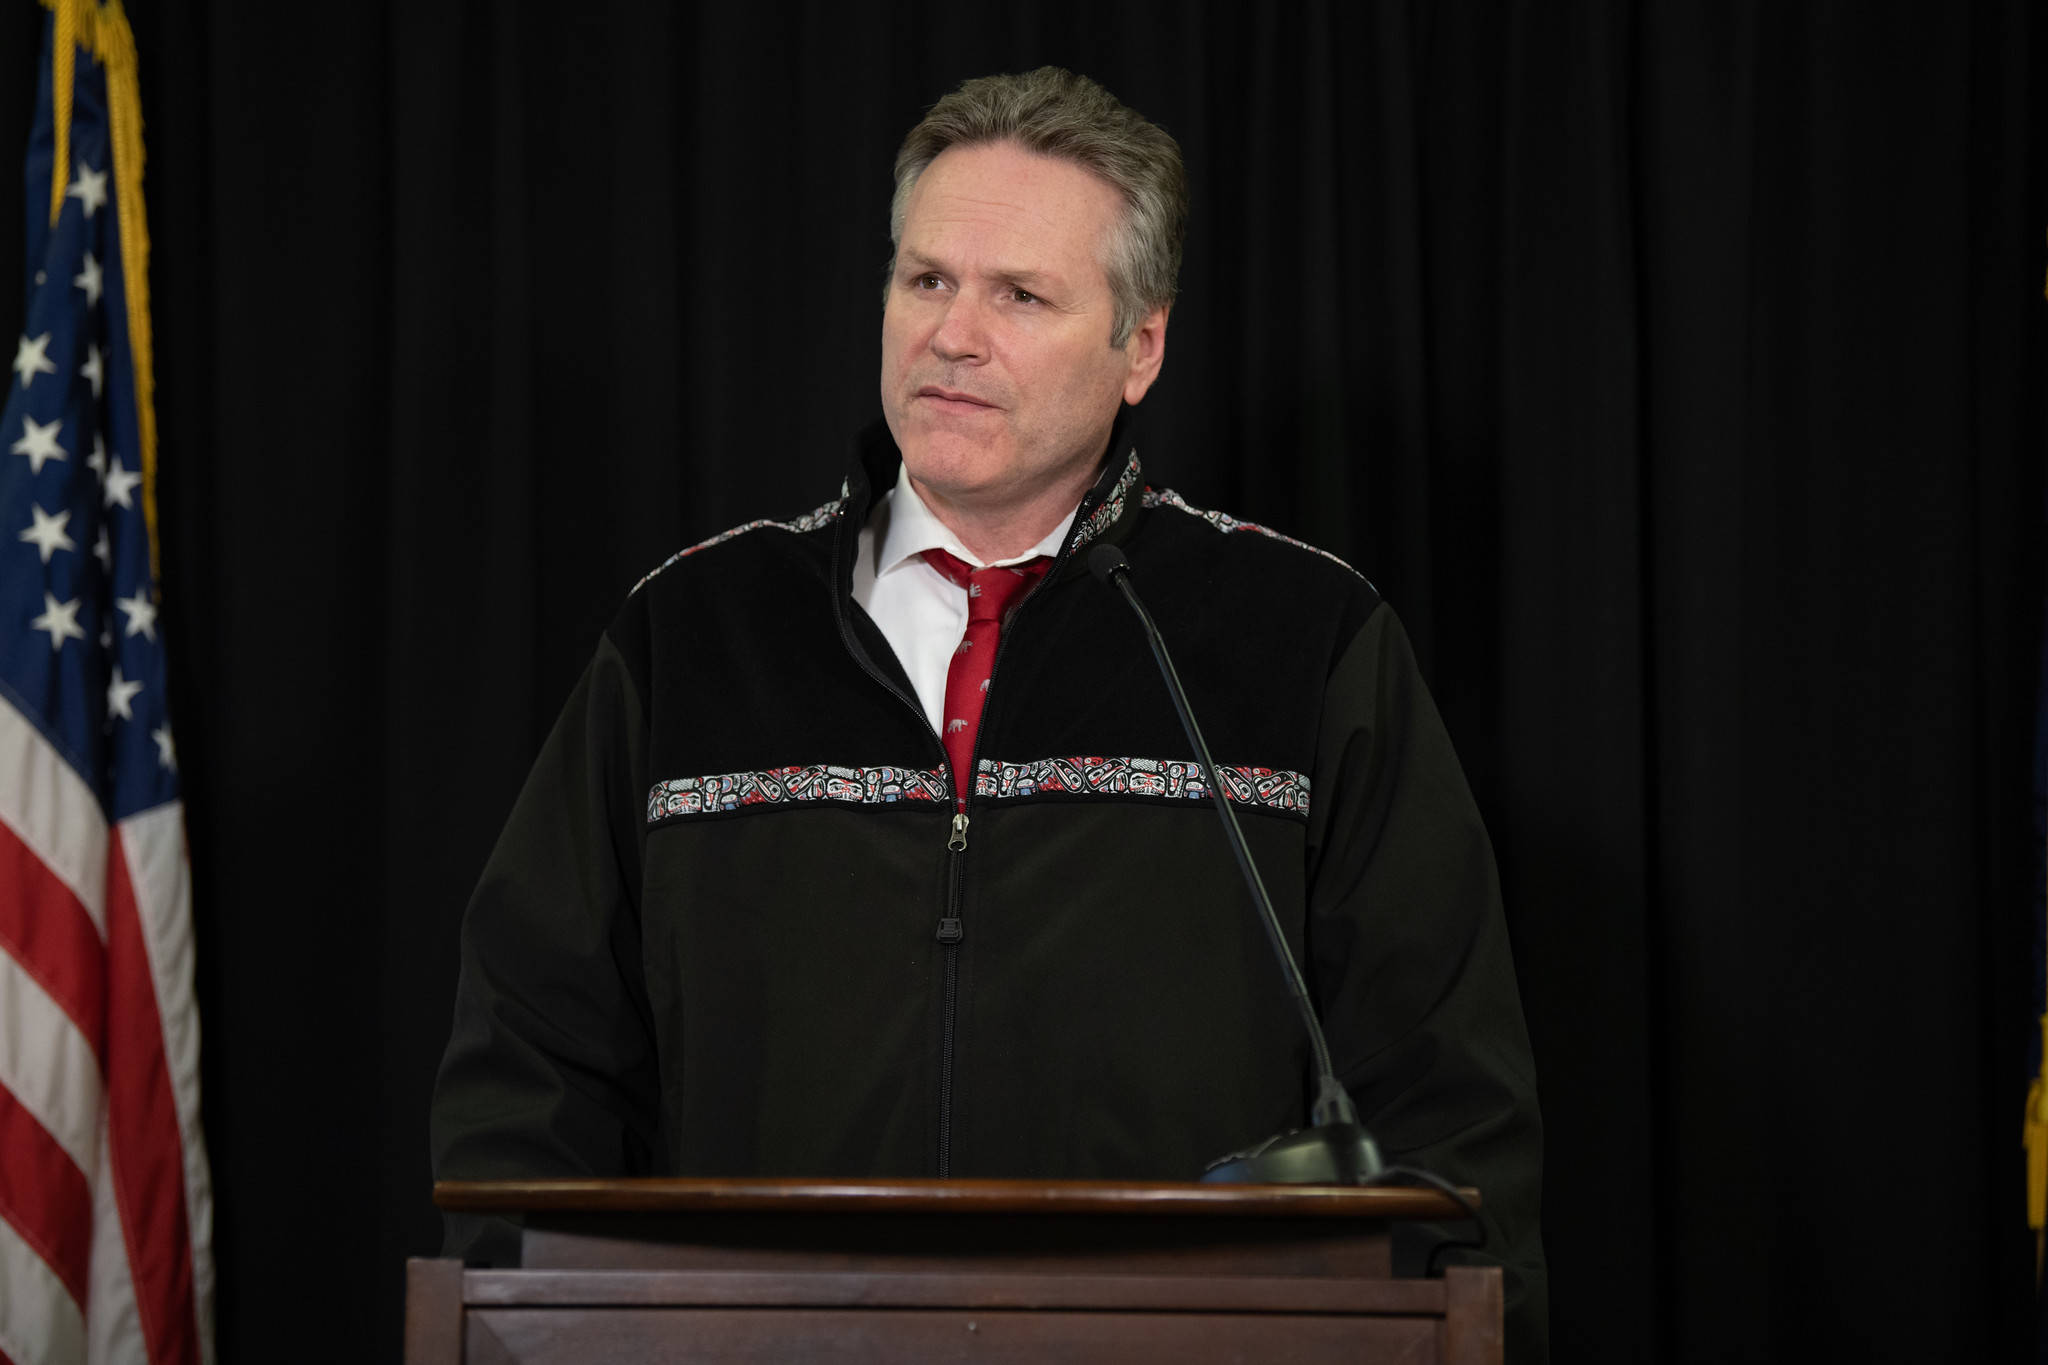 Gov. Mike Dunleavy speaks at a press conference in Anchorage on Friday, April 10, 2020. (Courtesy photo | Office of Gov. Mike Dunleavy)